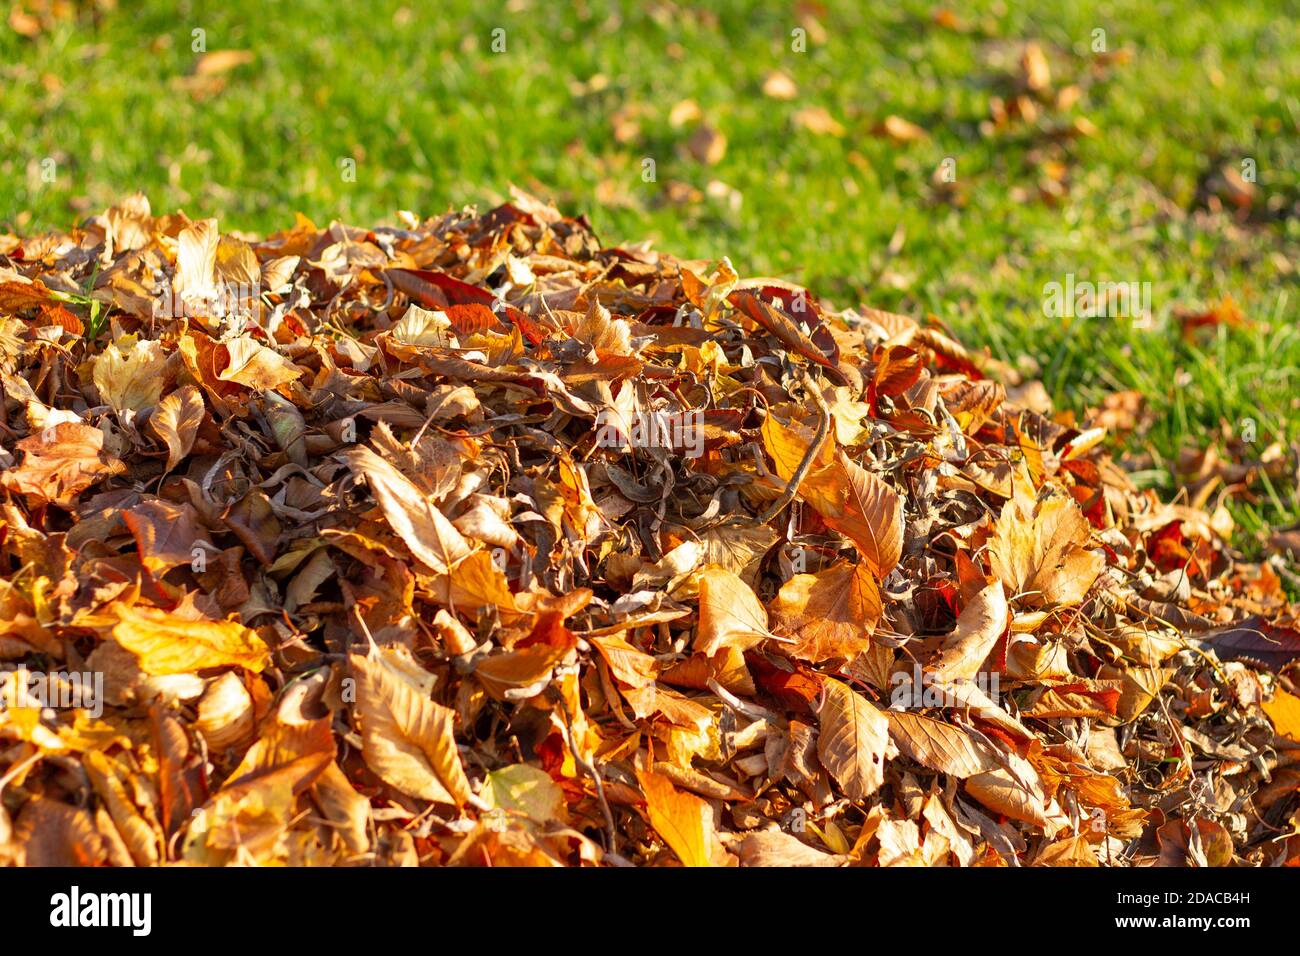 Pile of autumn leaves. Cleaning the leaves in the garden Stock Photo